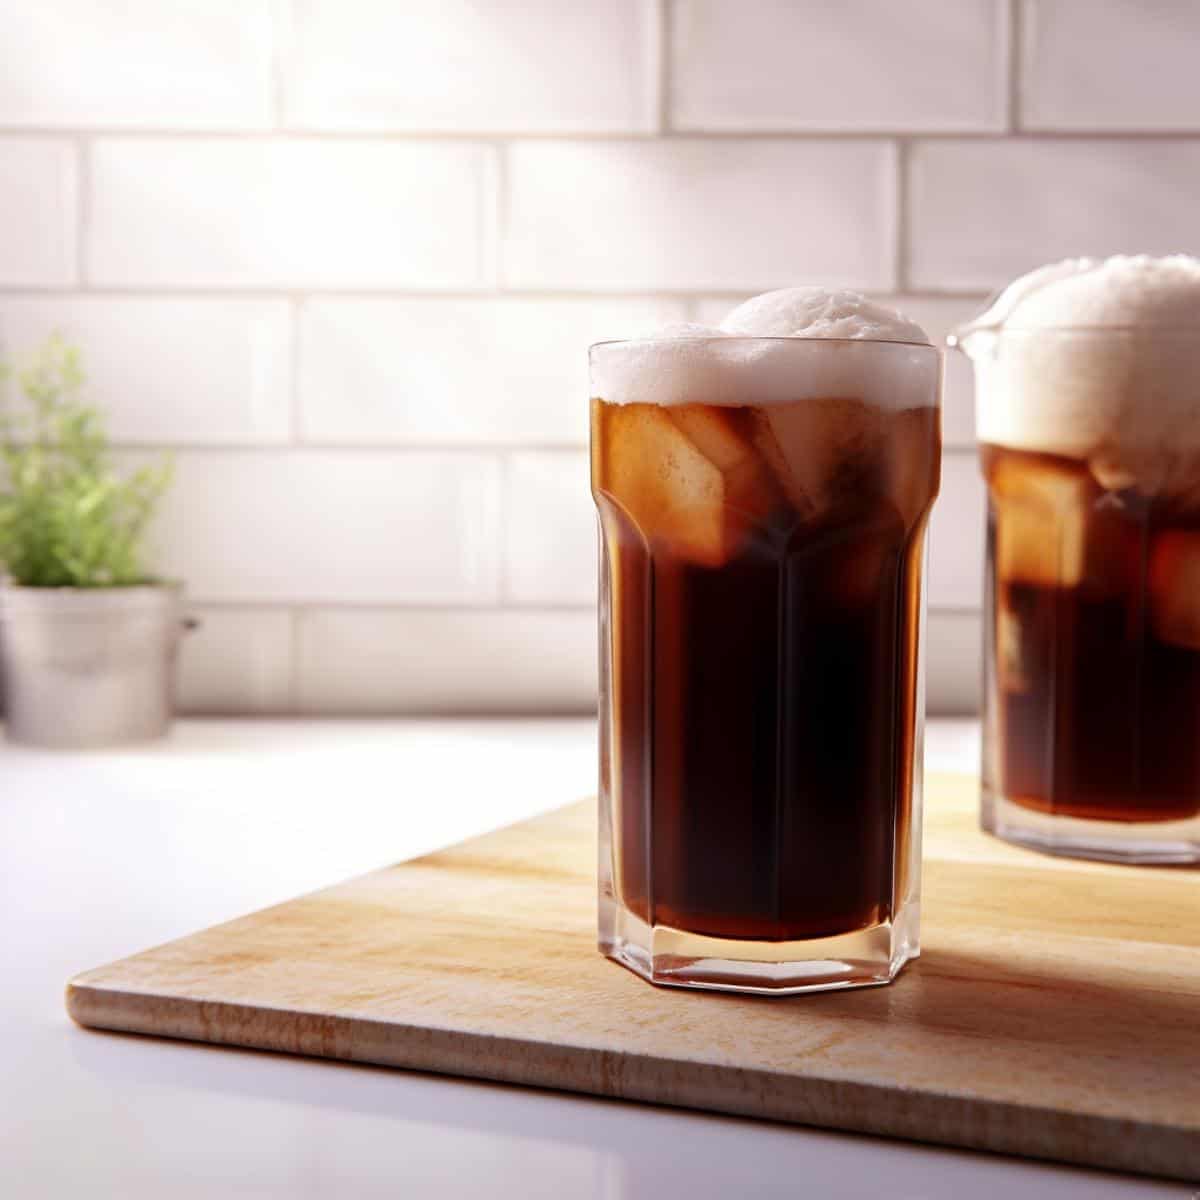 Chocolate Coke on a kitchen counter